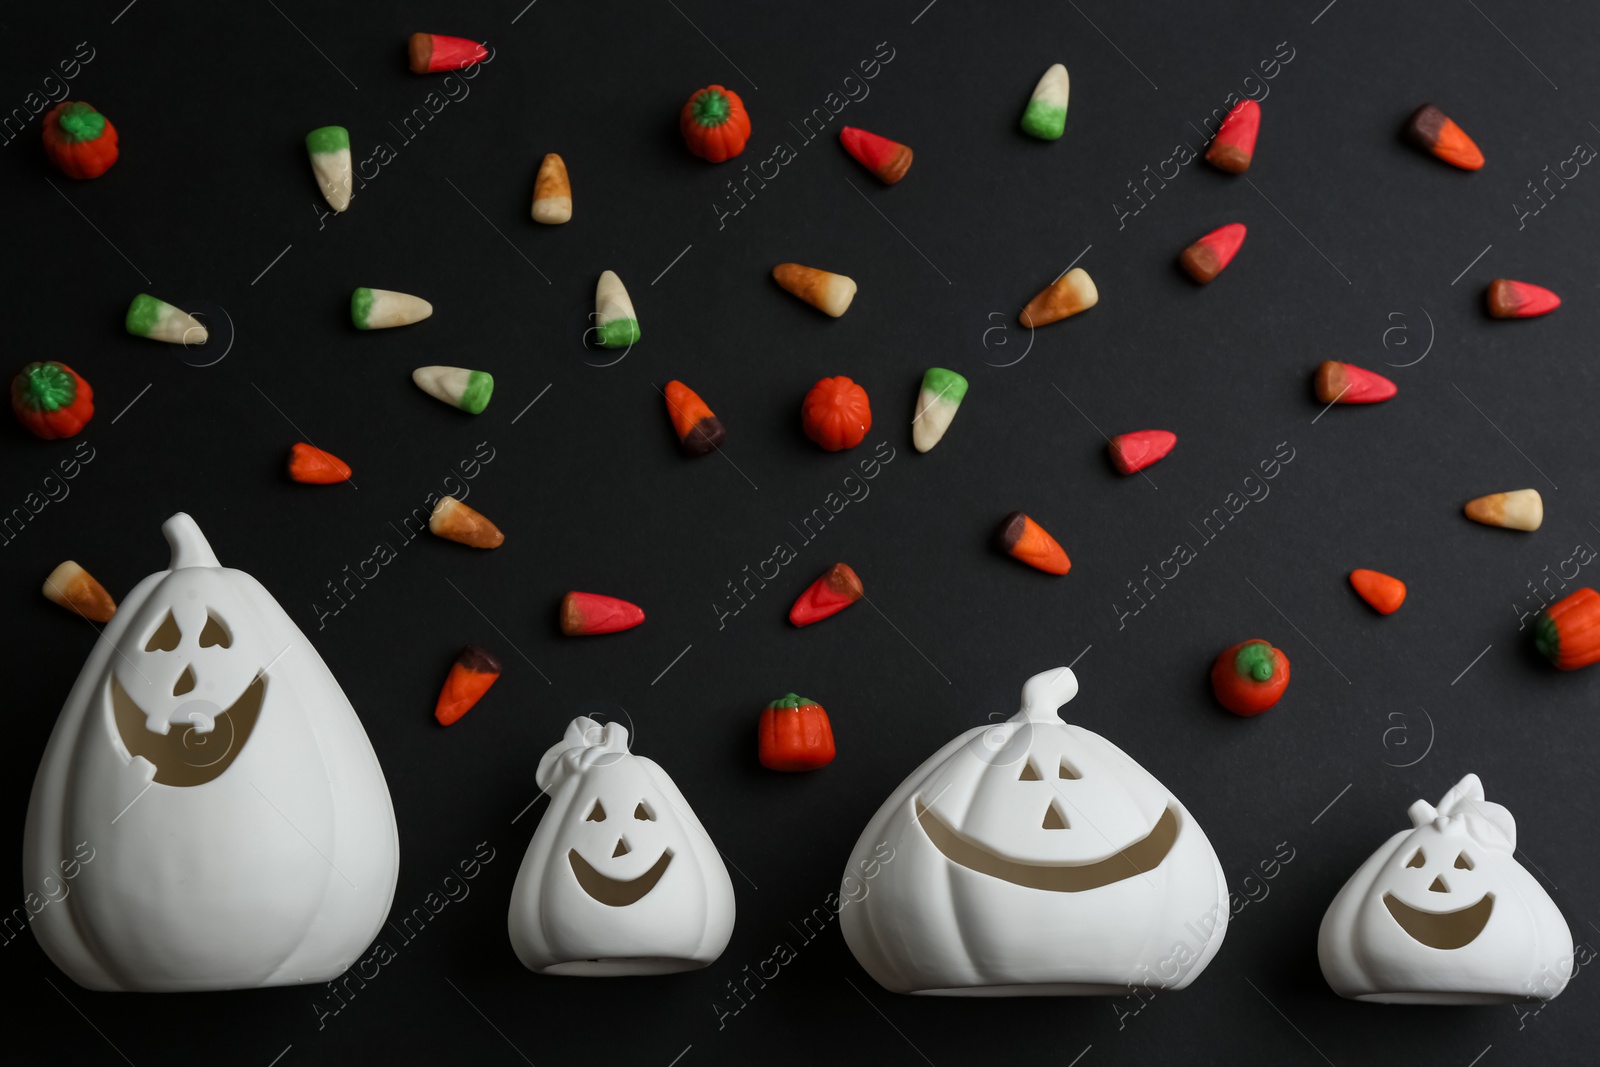 Image of White pumpkin shaped candle holders and jelly candies on black background, flat lay. Halloween decoration